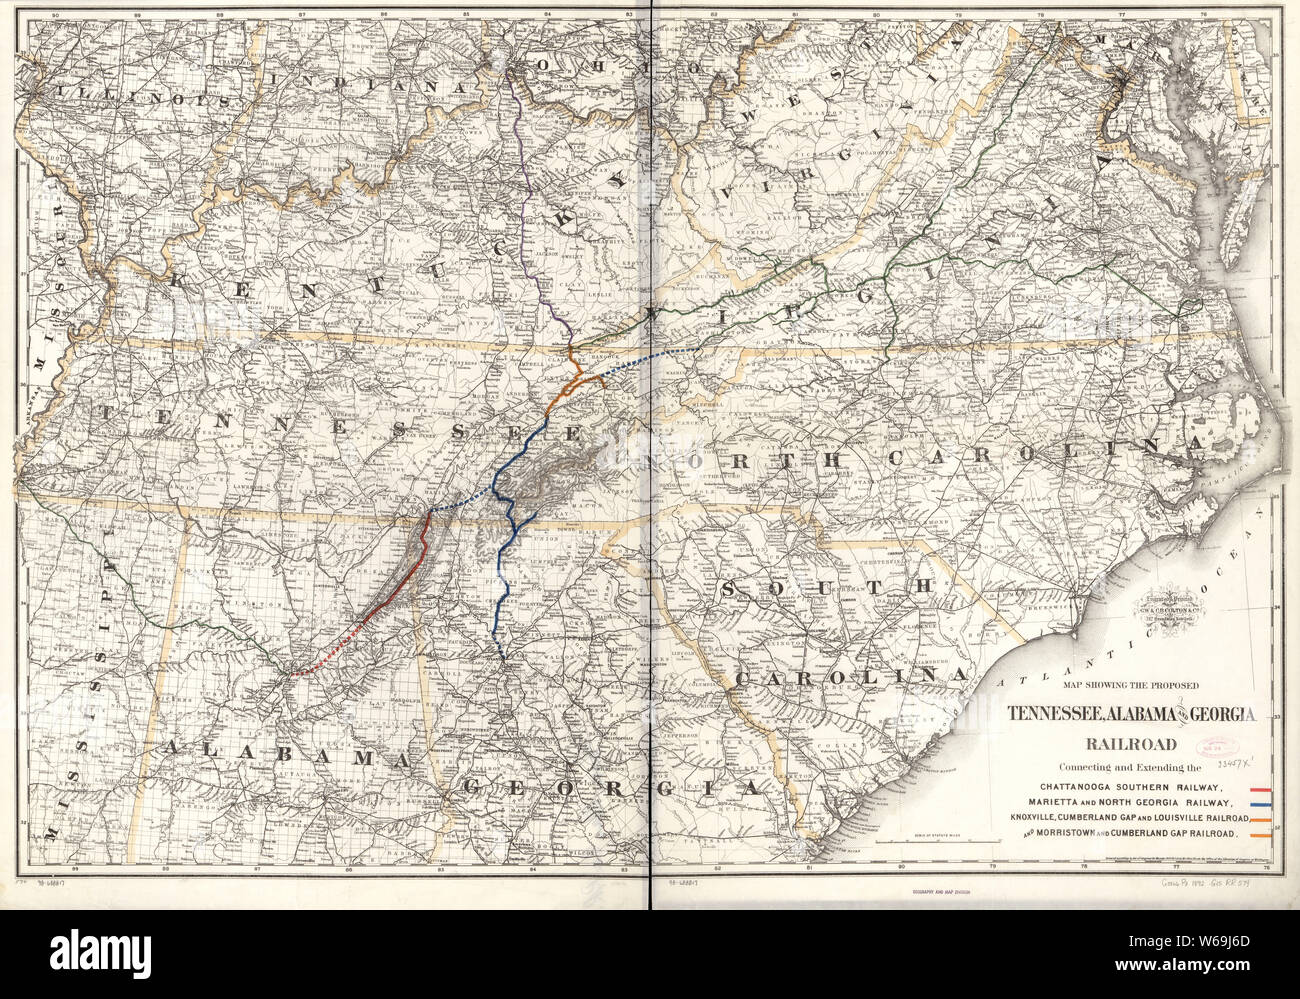 0393 Railroad Maps Map showing the proposed Tennessee Alabama and Georgia Railroad connecting and extending the Chattanooga Southern Railway Marietta and North Georgia Railway Knoxville Cumberland Gap Rebuild and Repair Stock Photo